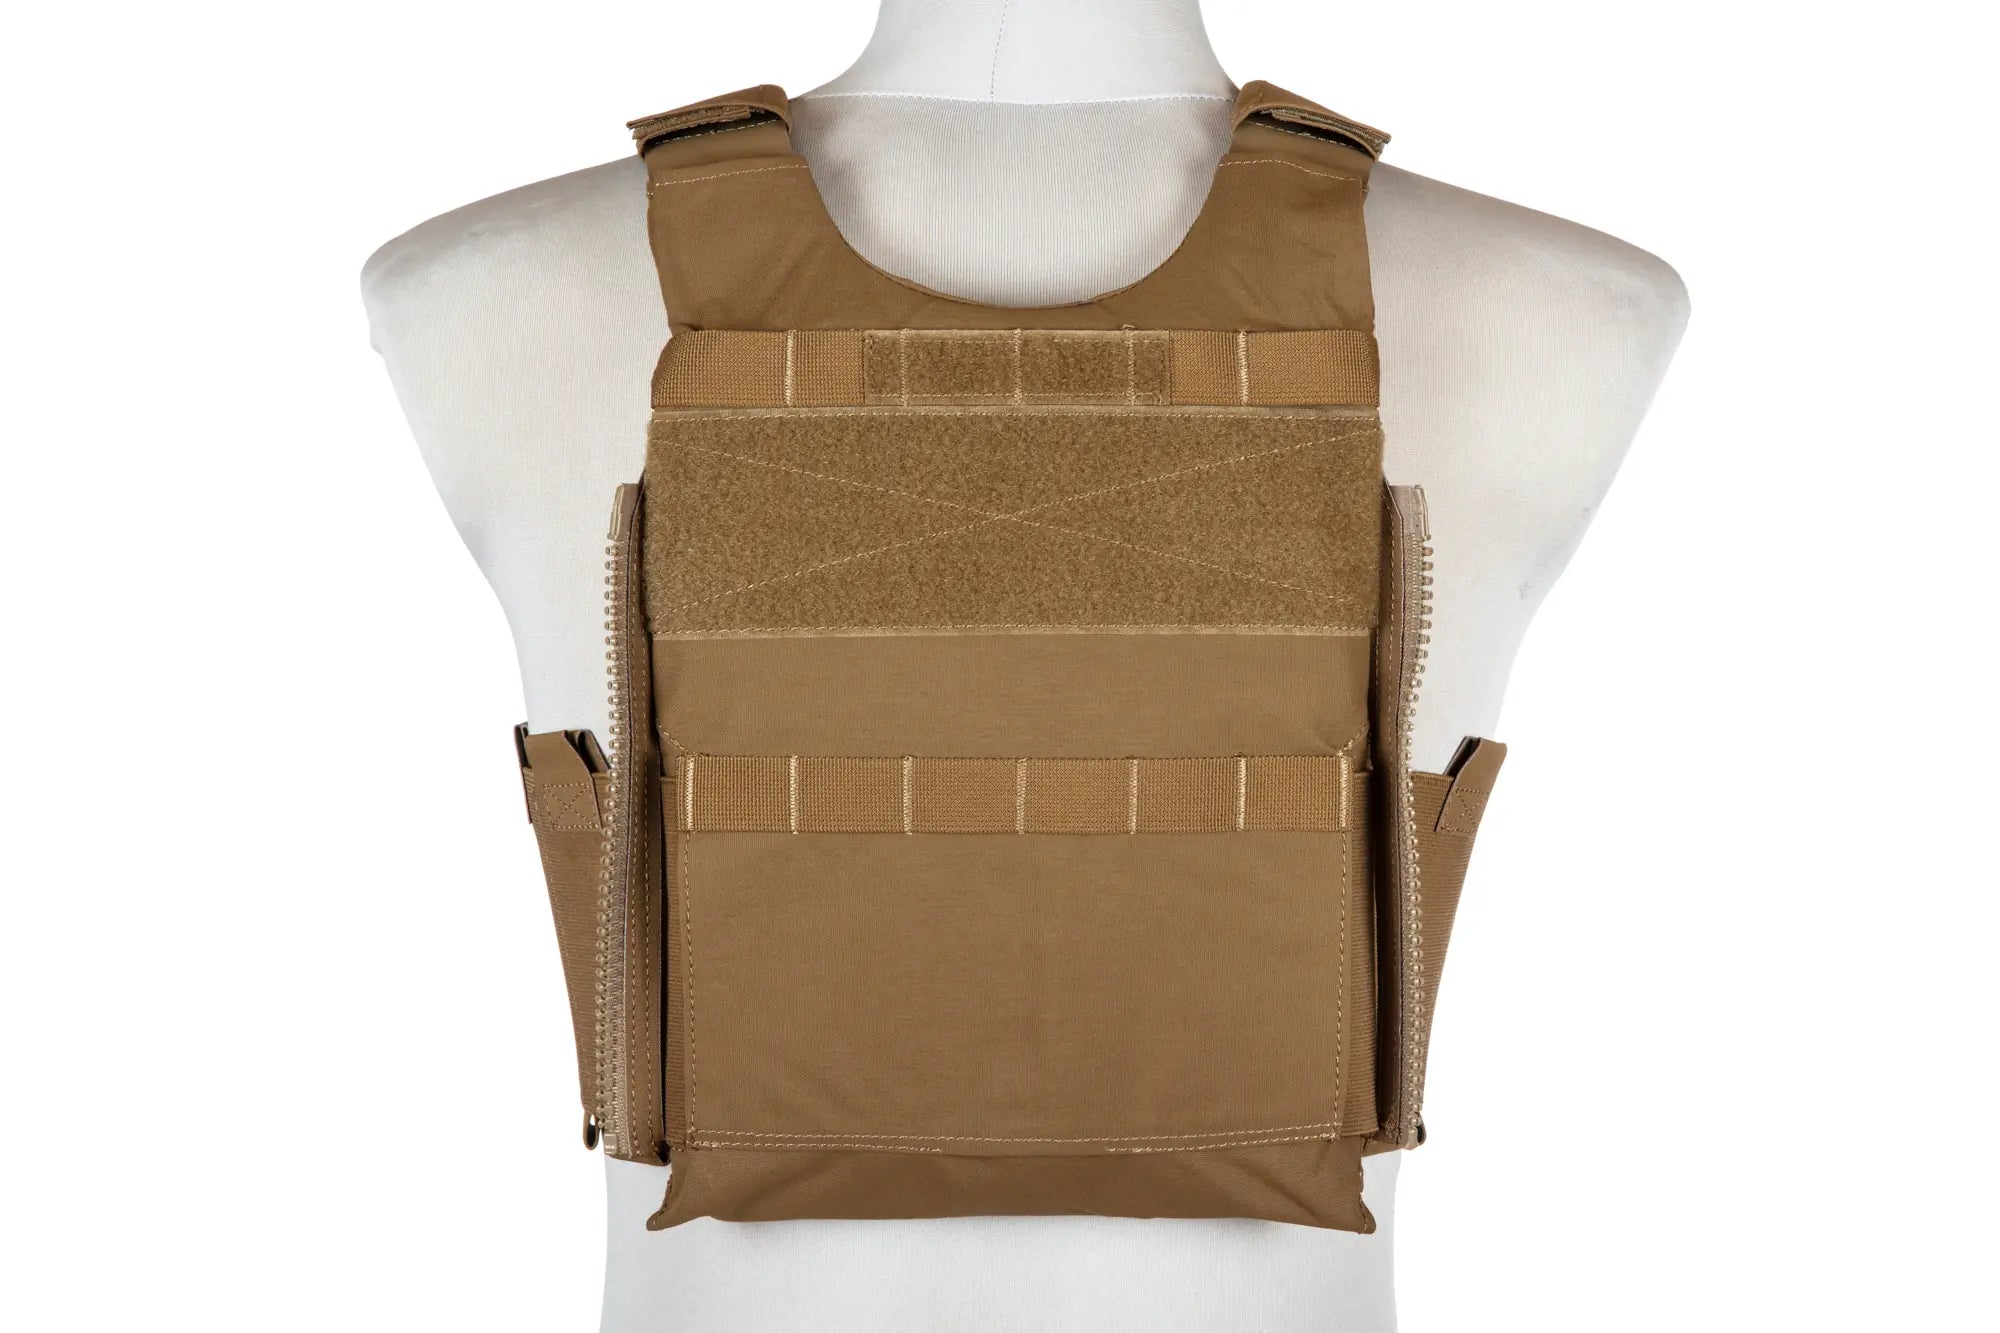 LV-119 Type Tactical Vest - Coyote Brown-4